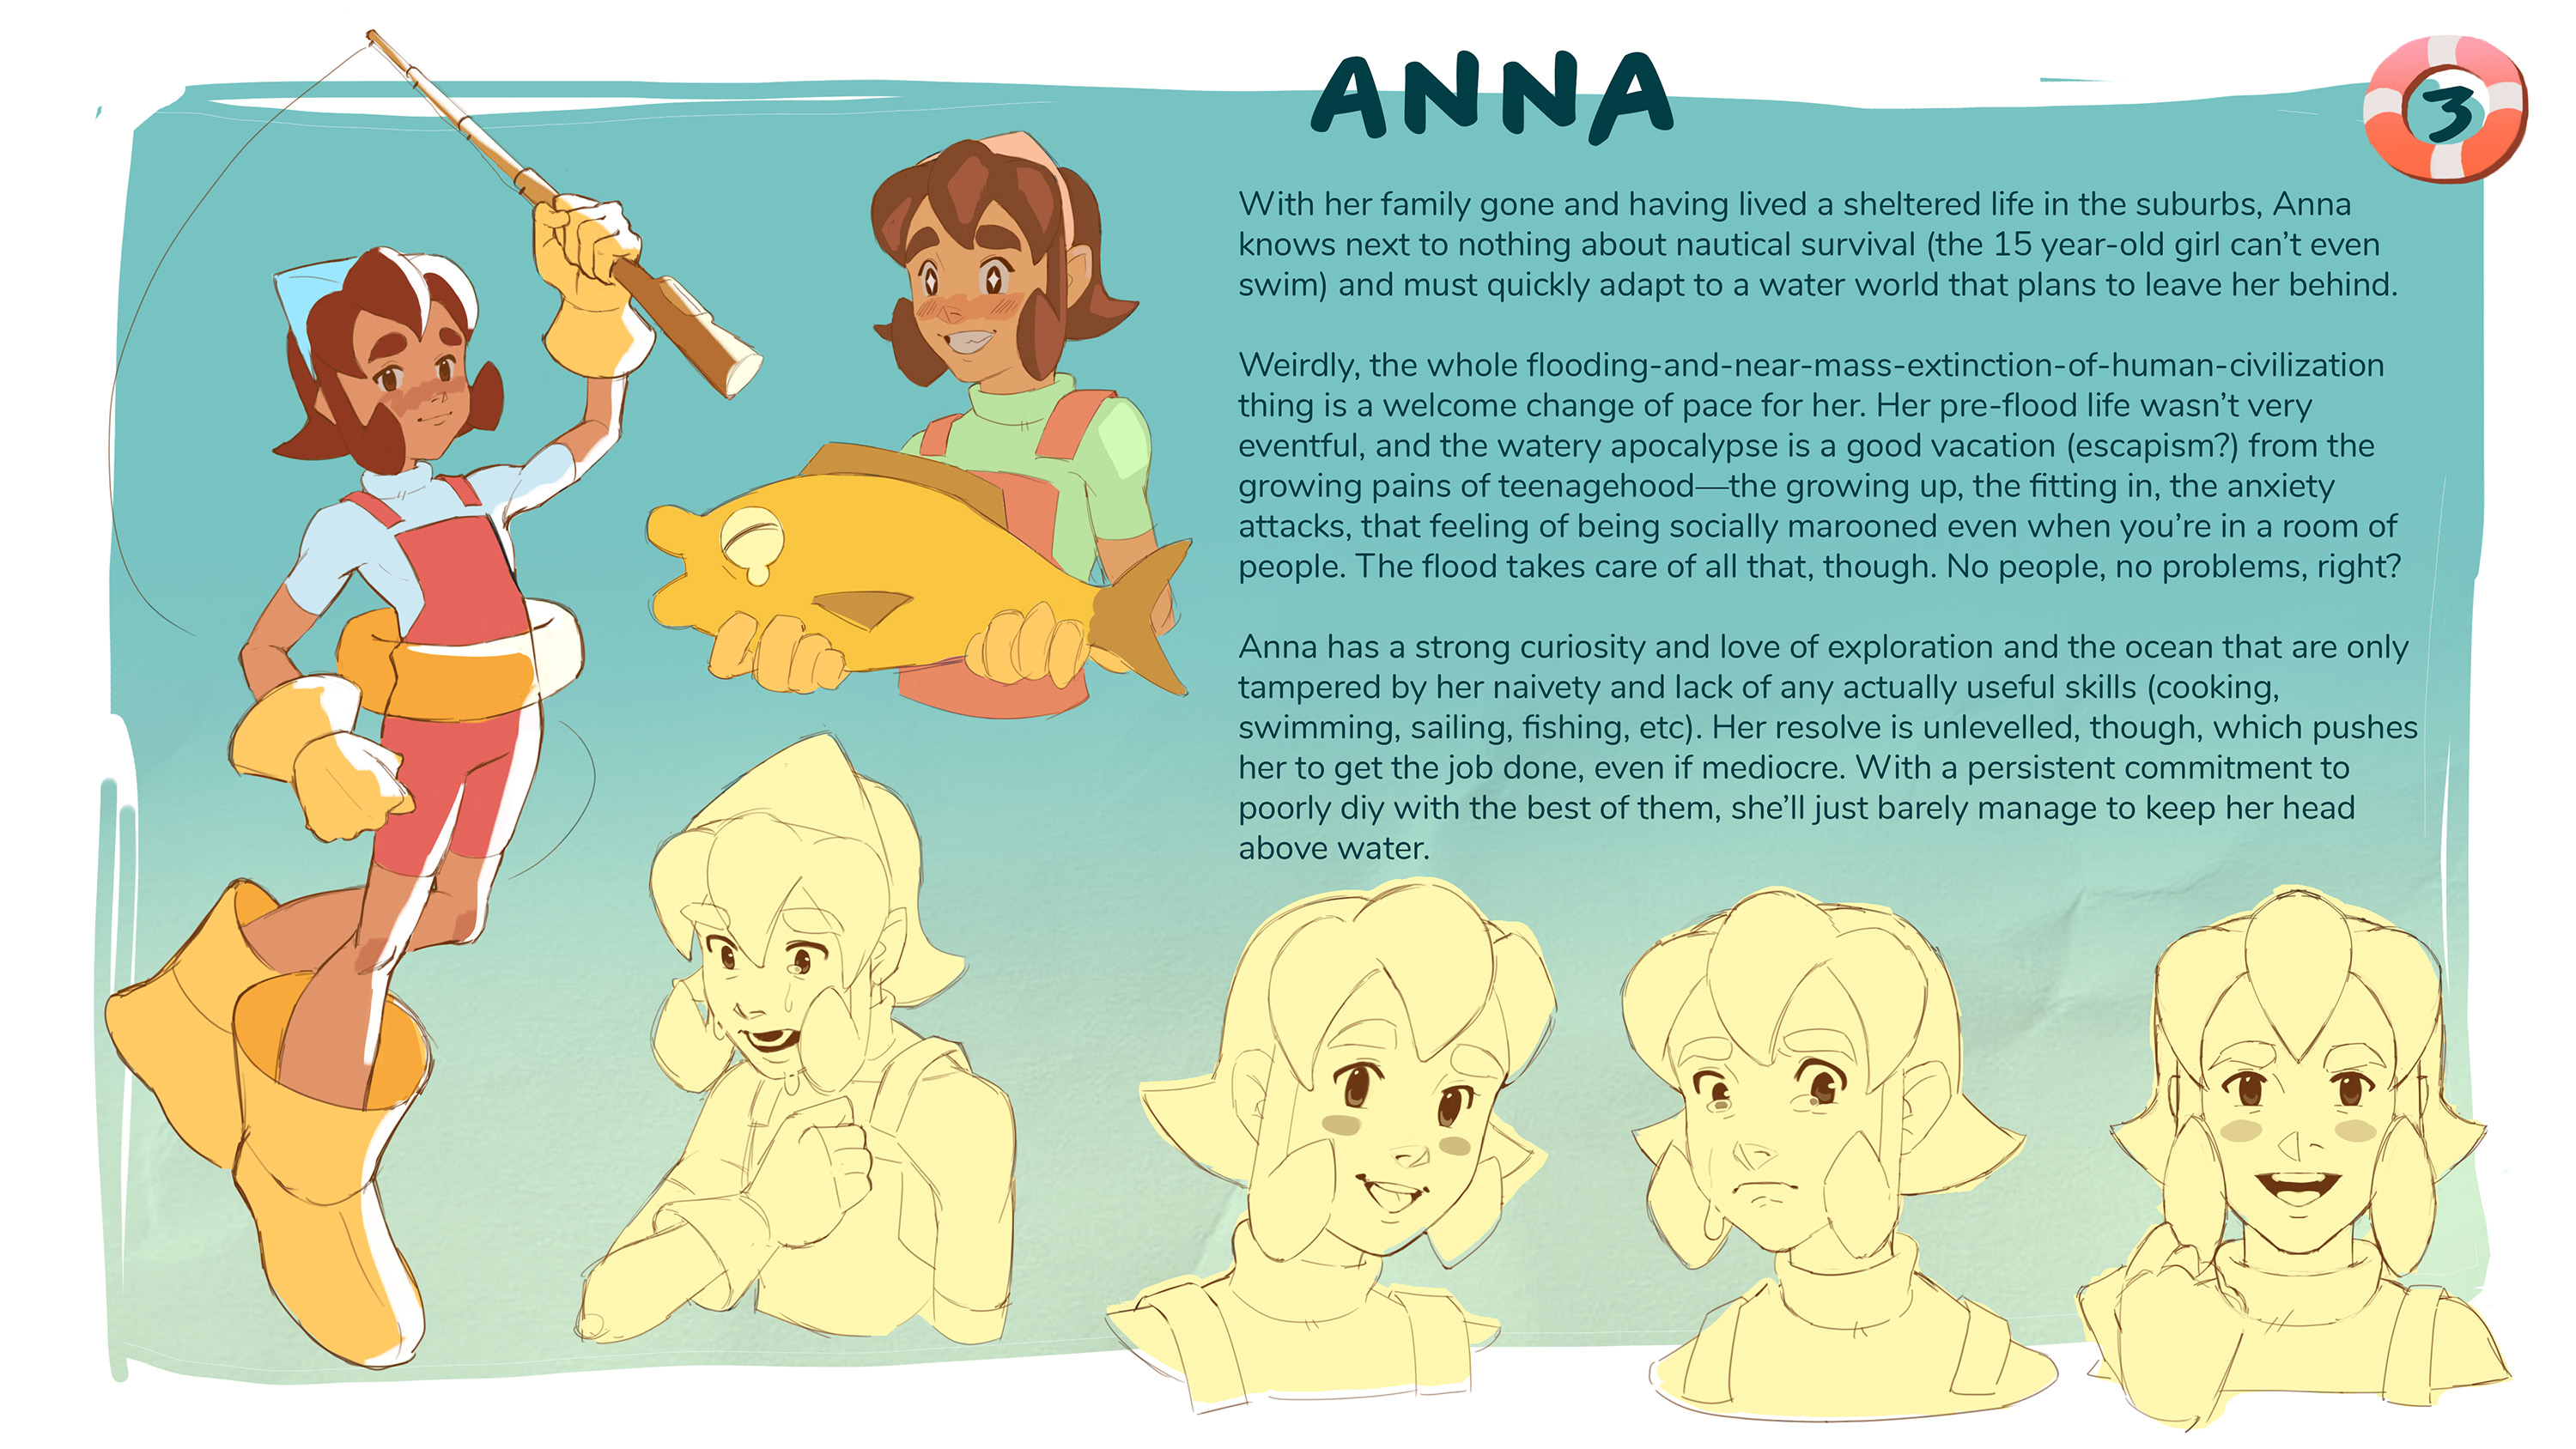  / Character Design of Anna, a 15-year-old fishergirl who must fend for herself in a flooded, post-apocalyptic world. Photoshop